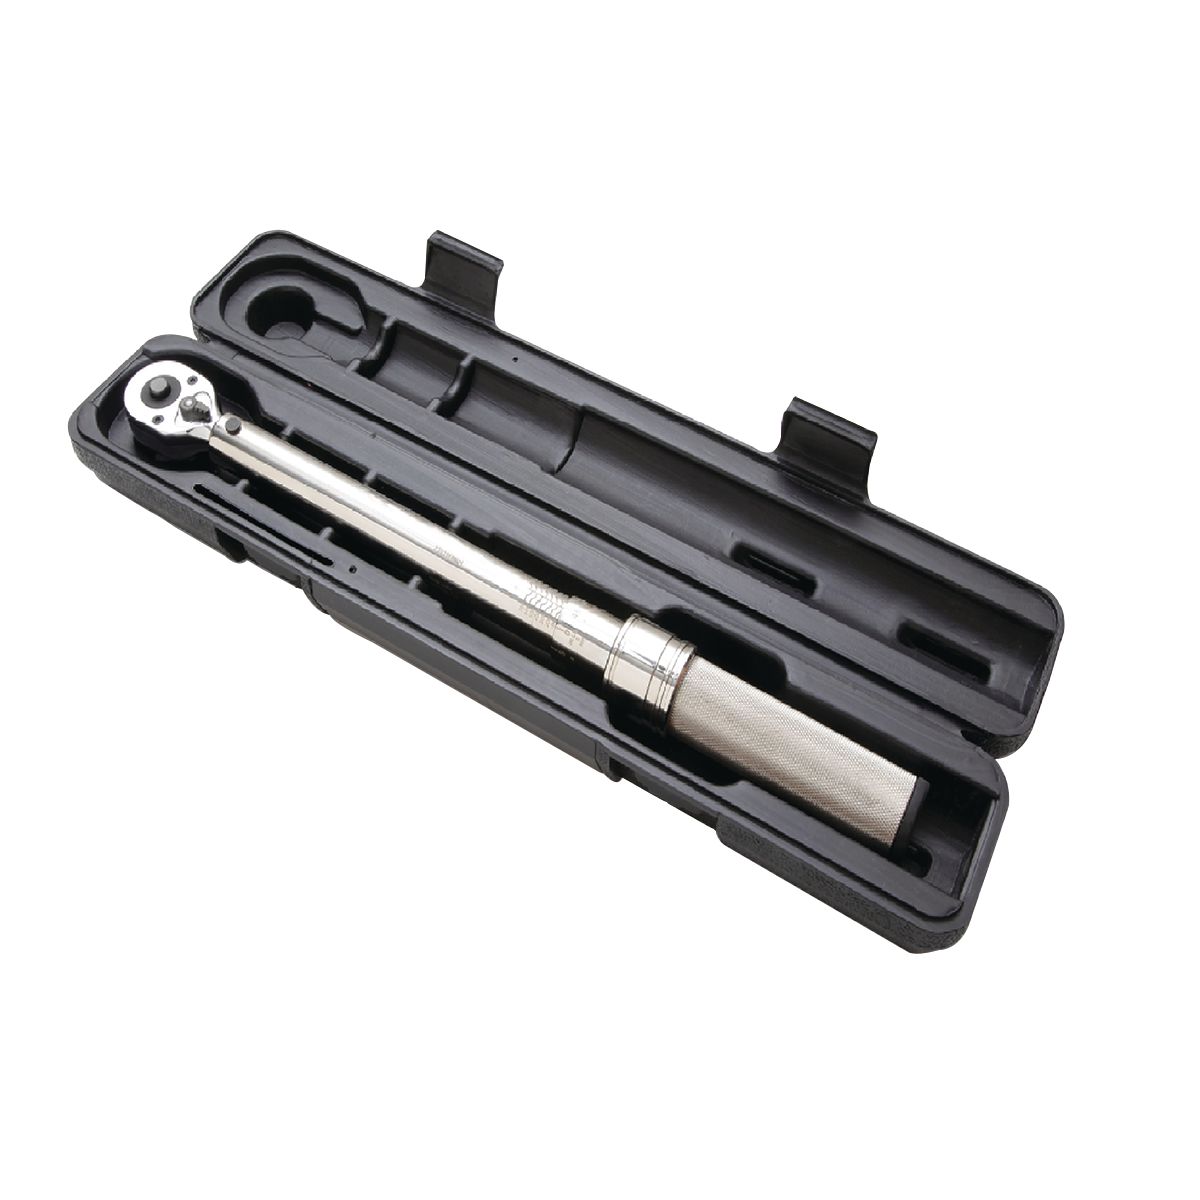 Burndy 1/2 Inch Drive Torque Wrench from Columbia Safety